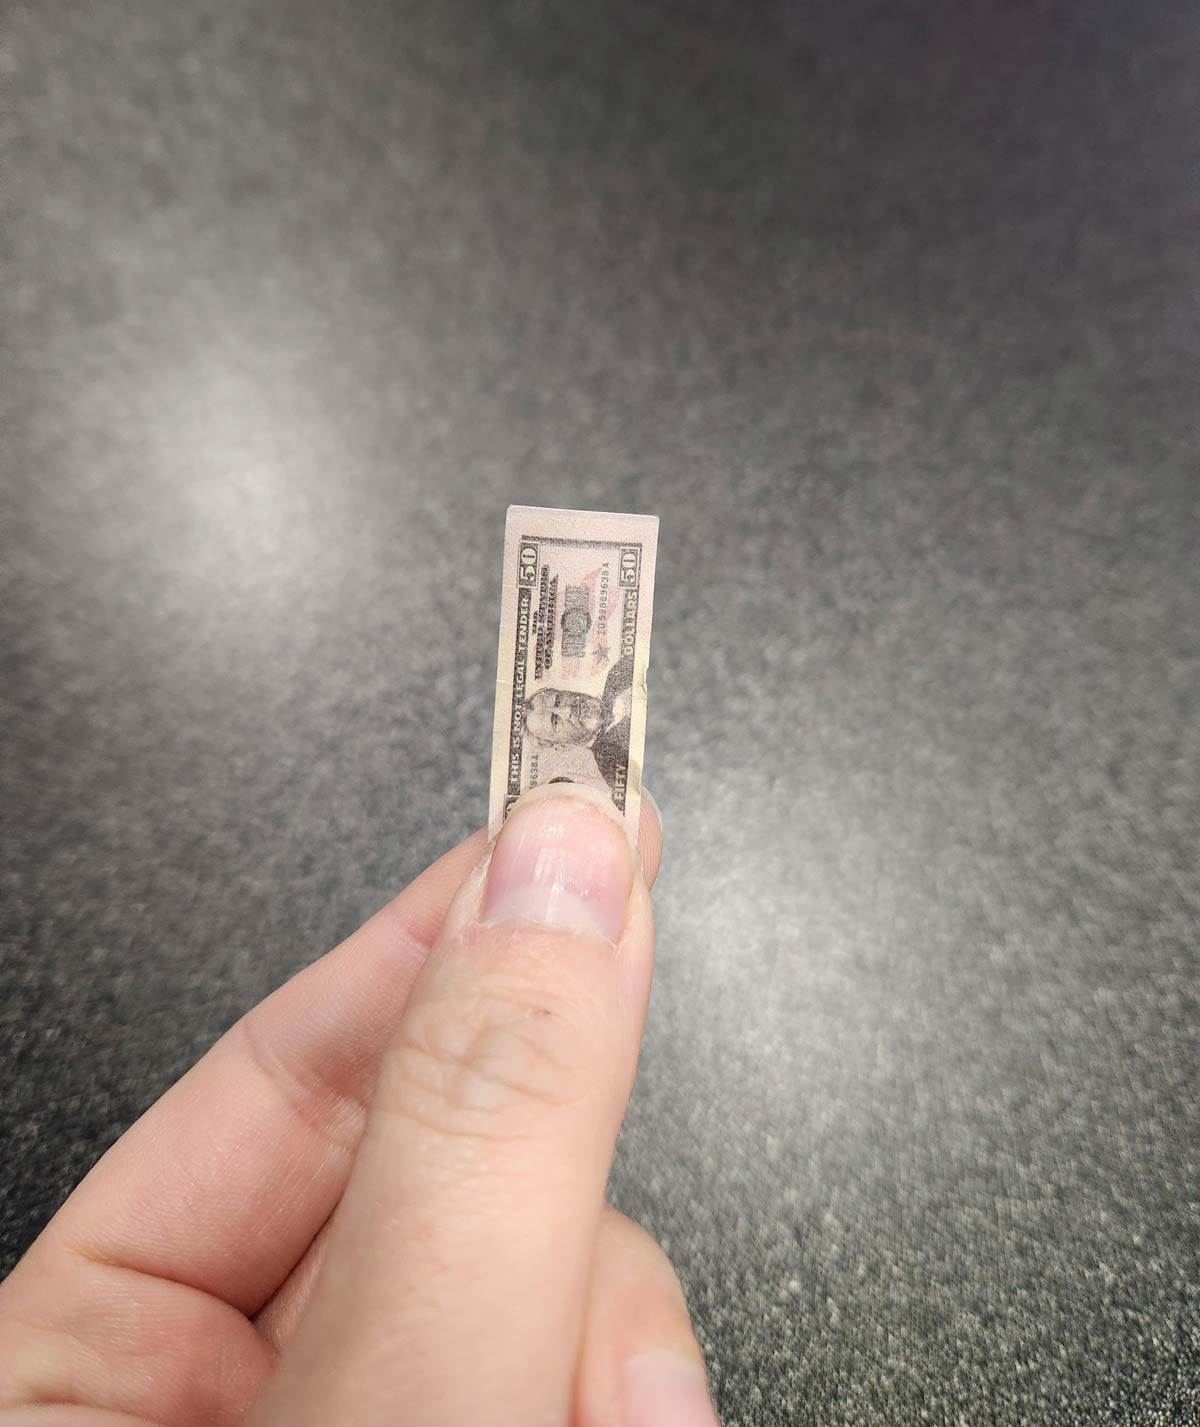 I found $50 at work today, what should I spend it on?